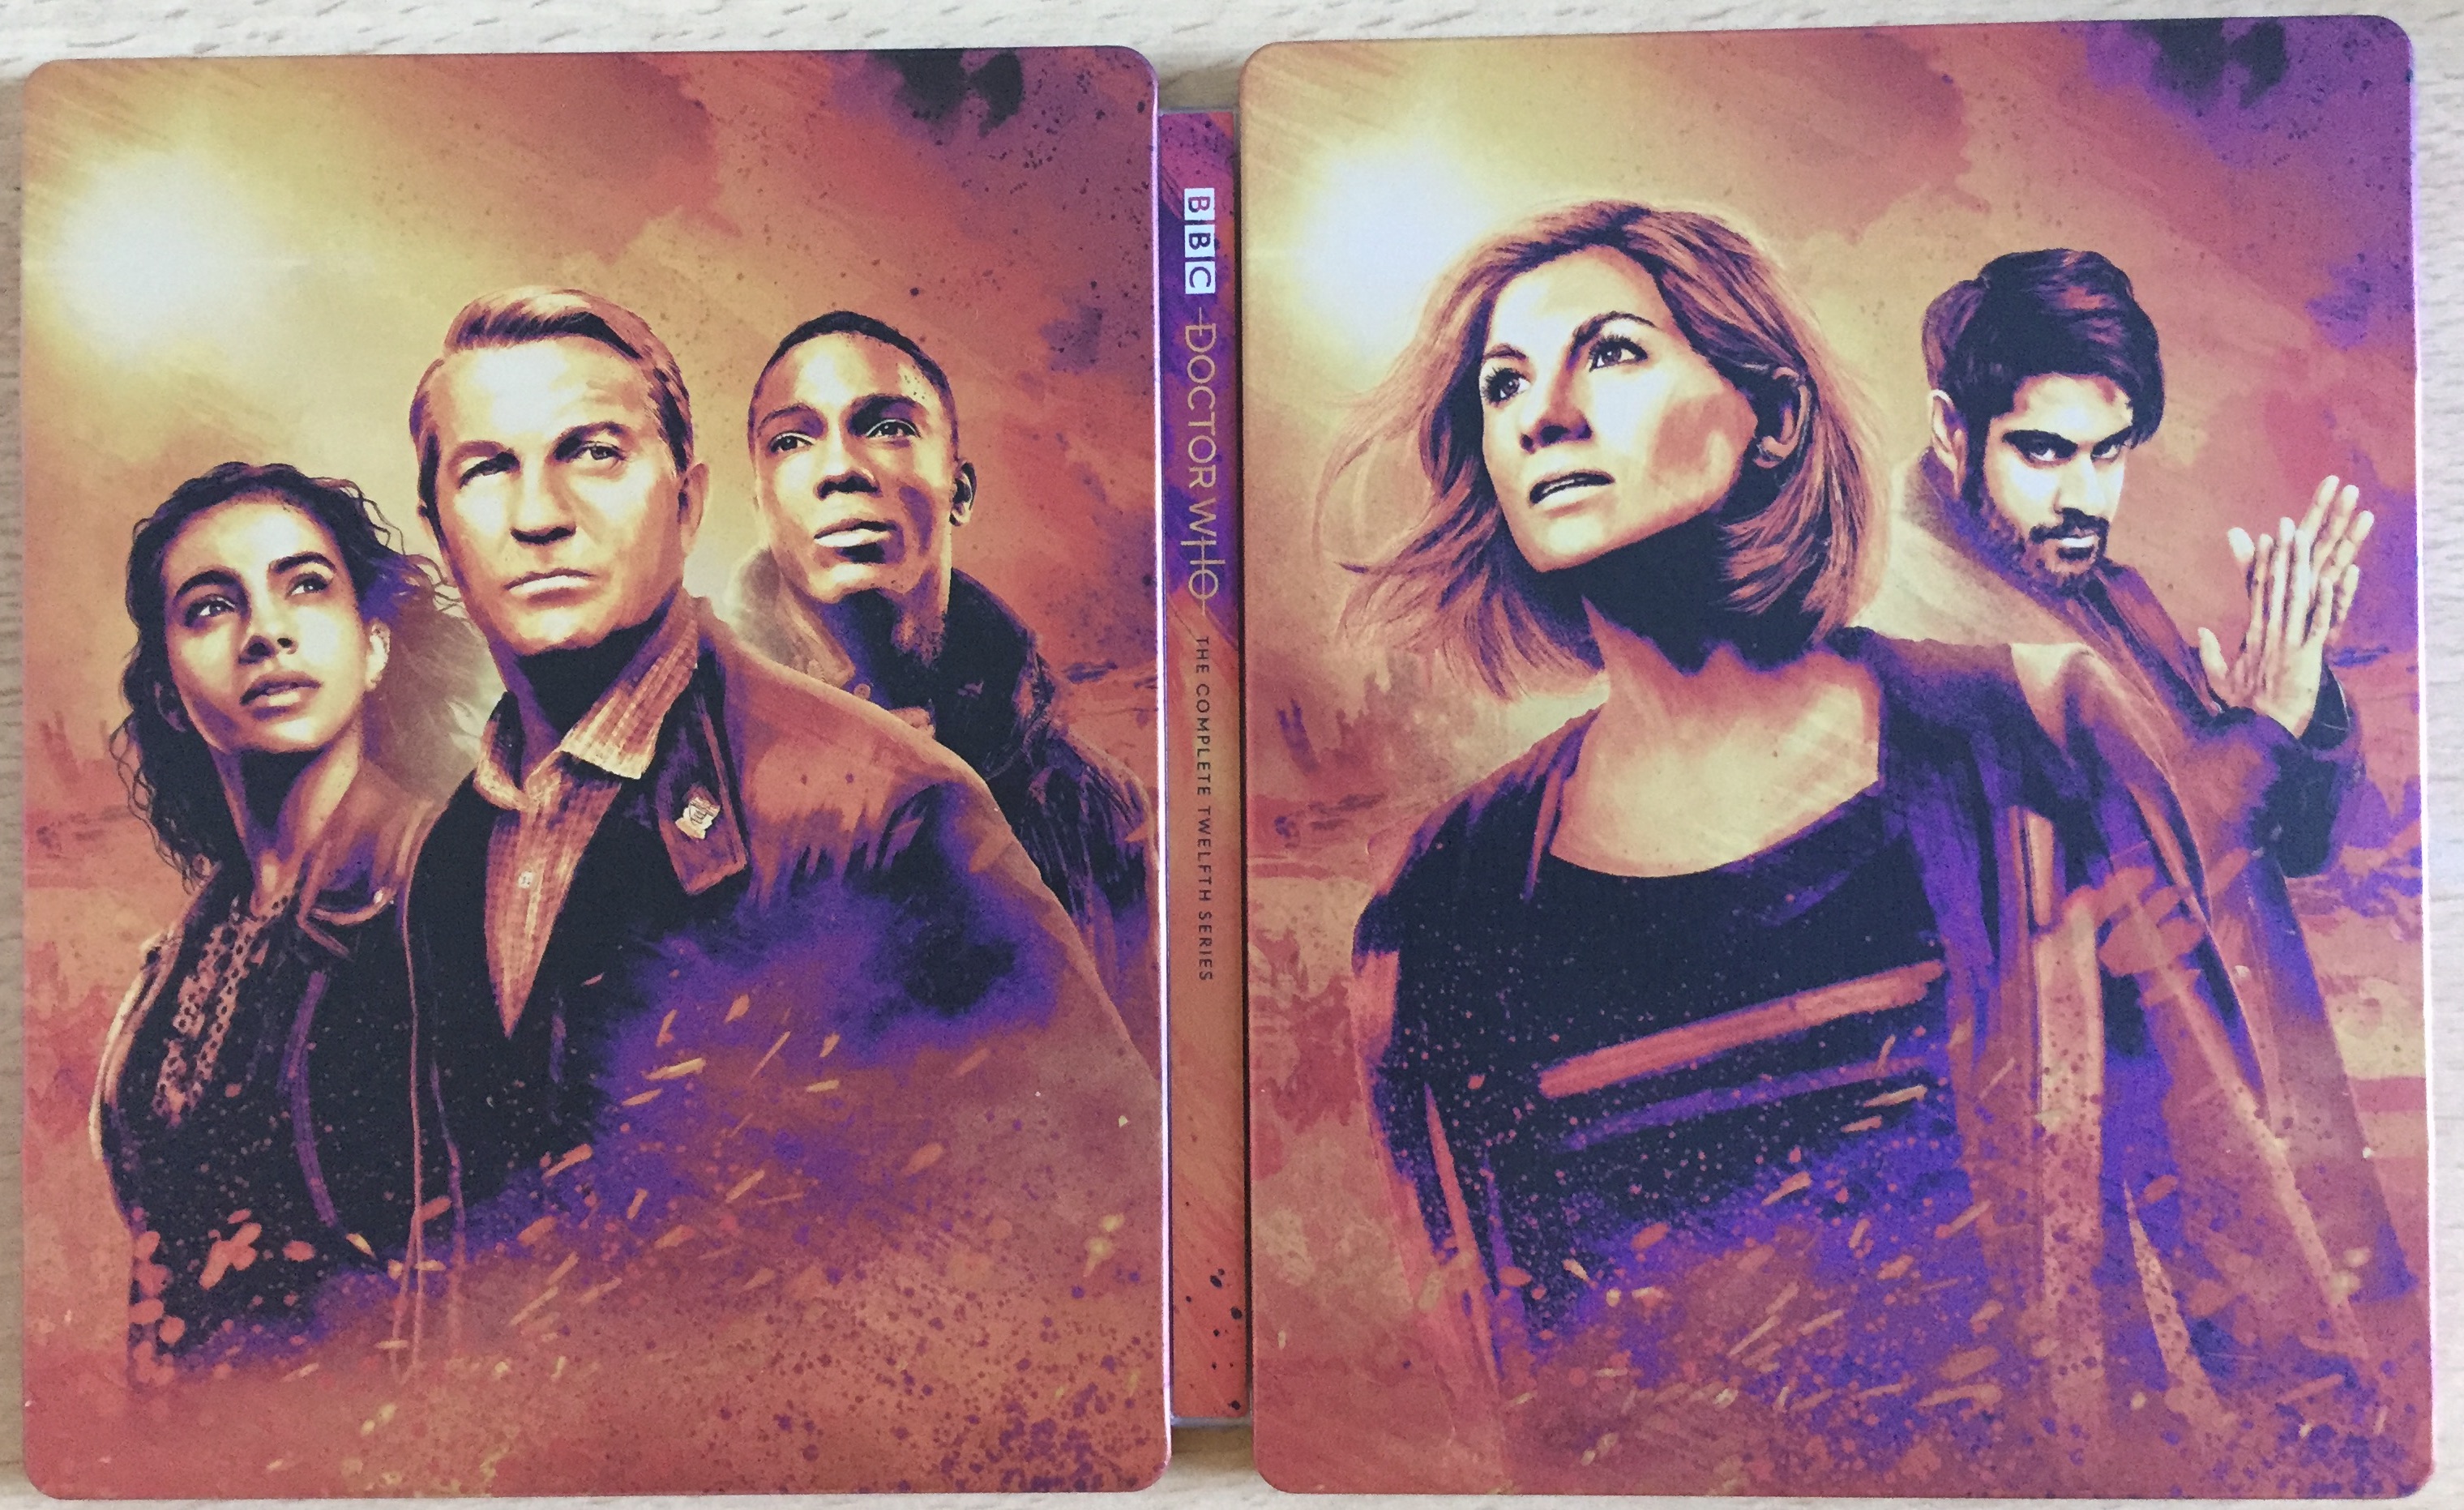 Steelbook cover for the blu-ray set of Doctor Who Series 12, spread open so that the artistic portraits of the cast members on the back and front covers are both visible. On the right, the front cover shows the Doctor and the Master, while the back cover on the left shows companions Yasmin, Graham and Ryan.